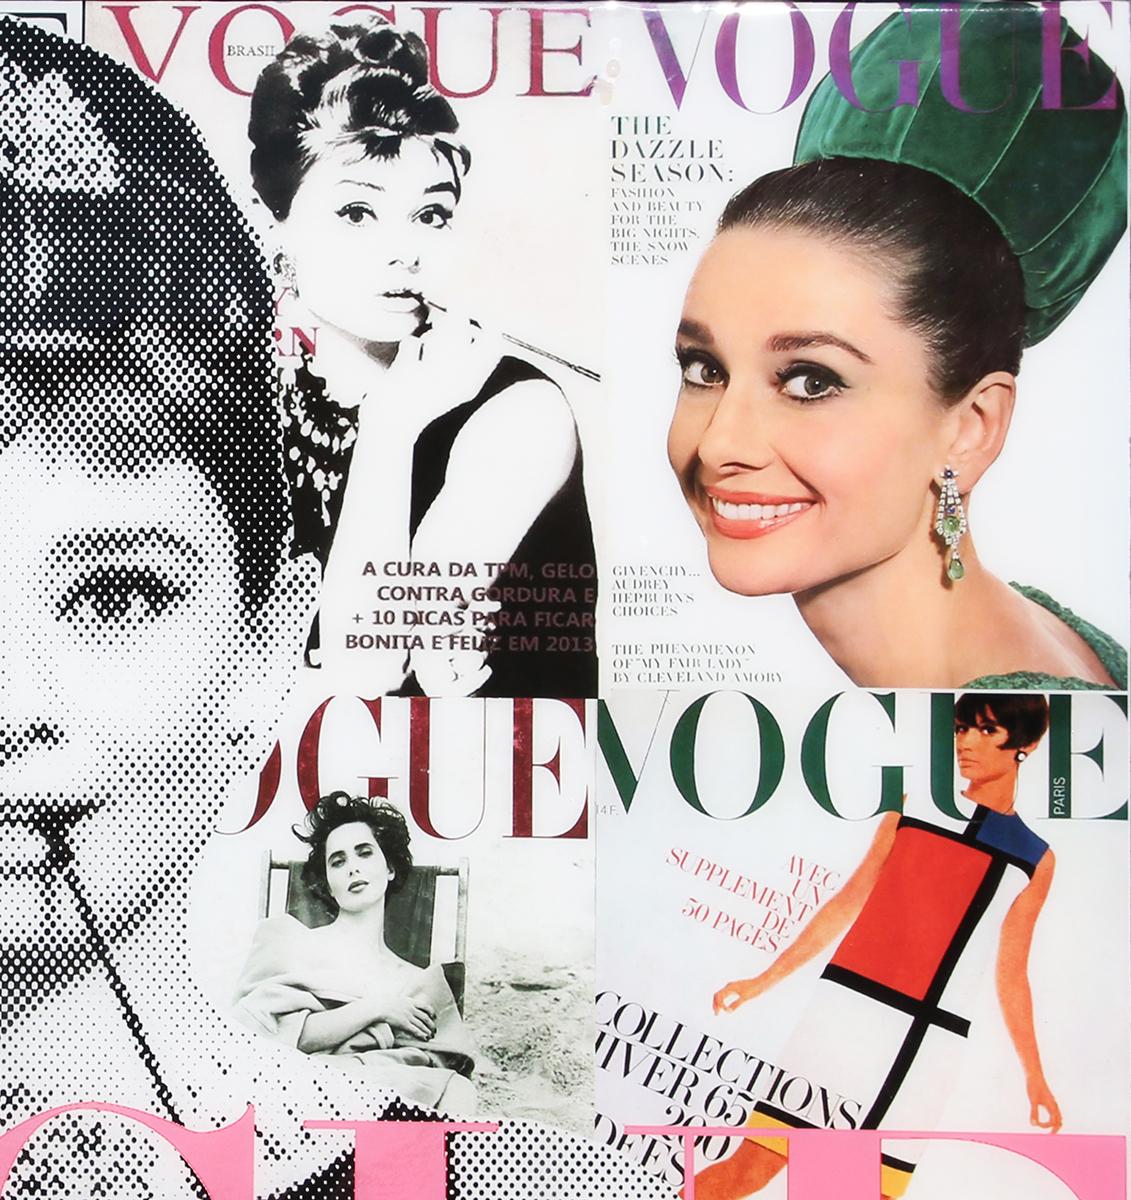 Portrait collage of cultural icon and actress Audrey Hepburn encased in resin. The background features a collection of pop cultural magazine prints as well as the iconic Vogue Magazine logo along the upper margin. Signed by the artist in the front